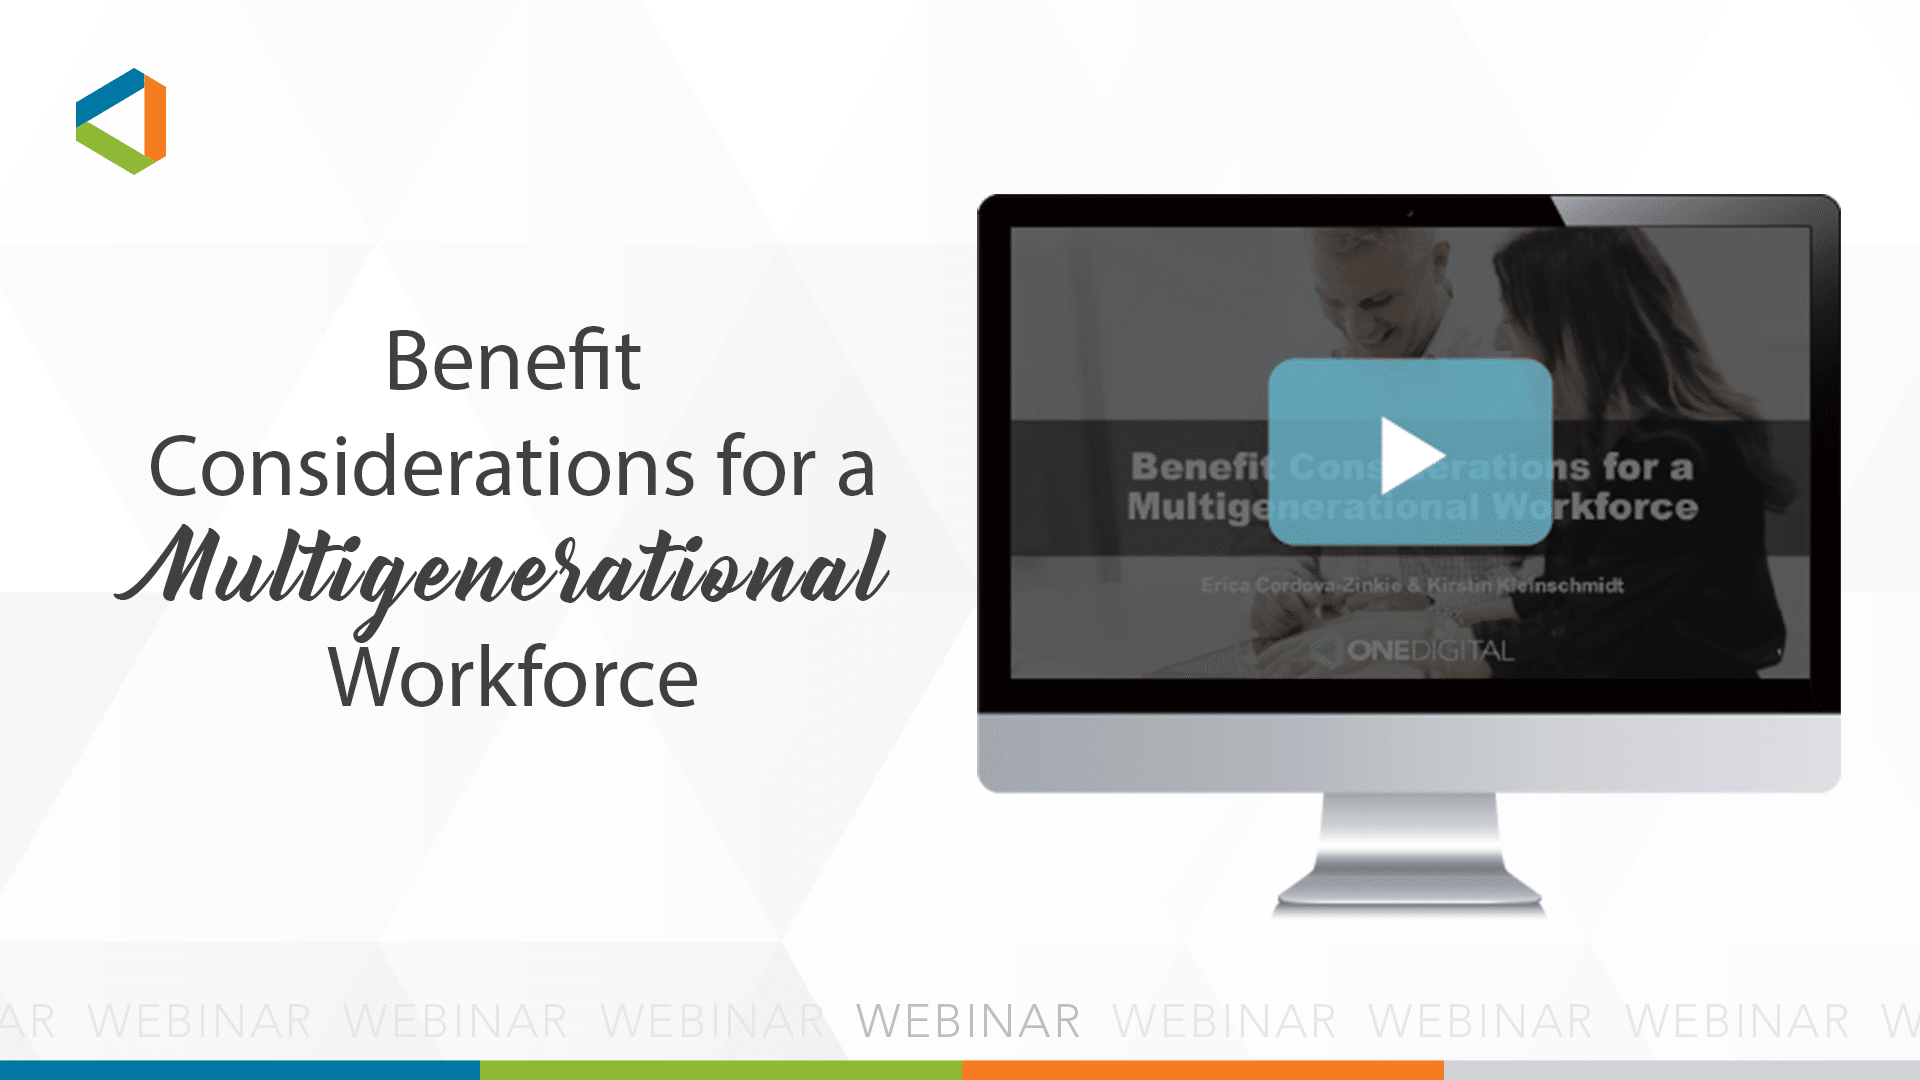 Watch the Benefits Considerations for a Multigenerational Workforce Webinar Now